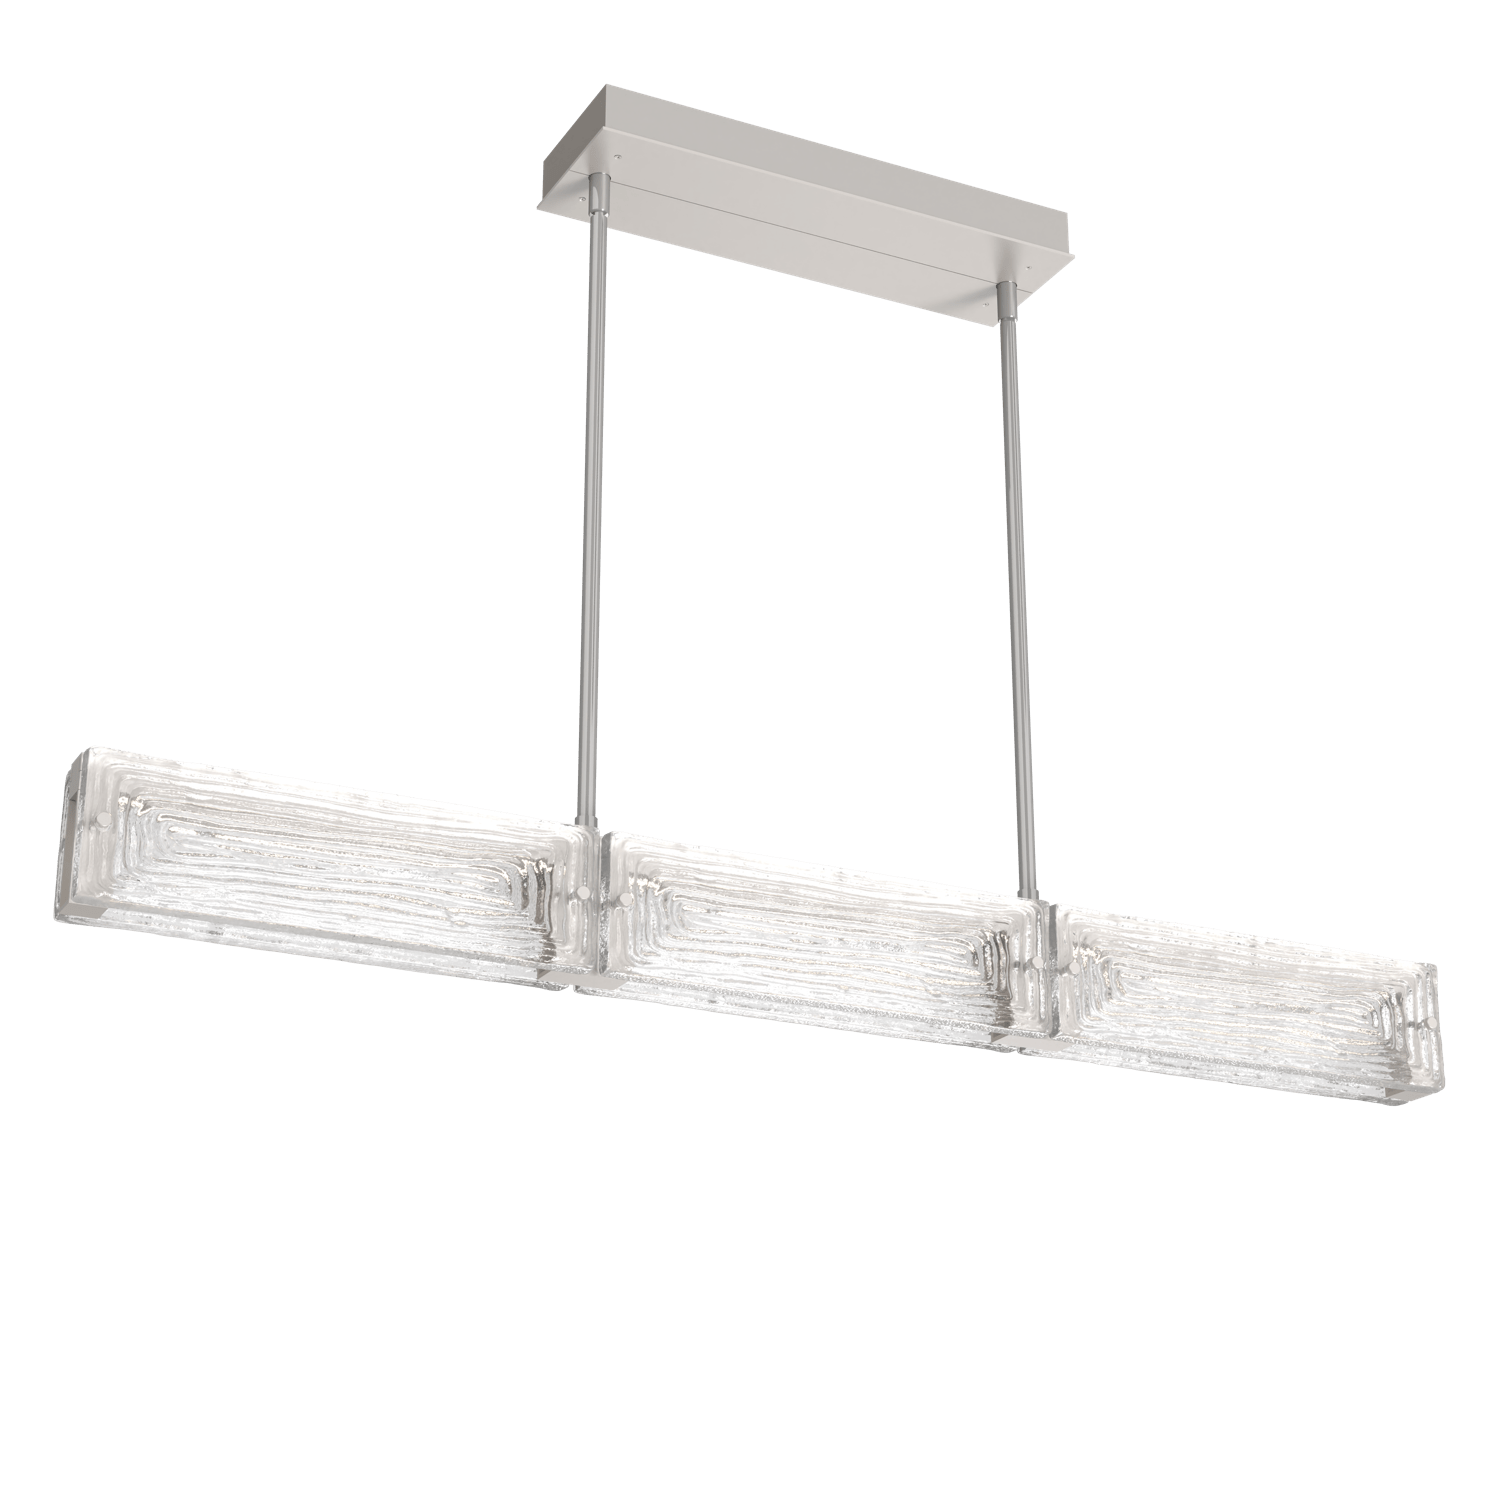 PLB0090-43-BS-TL-Hammerton-Studio-Tabulo-43-inch-linear-chandelier-with-metallic-beige-silver-finish-and-clear-linea-cast-glass-shade-and-LED-lamping